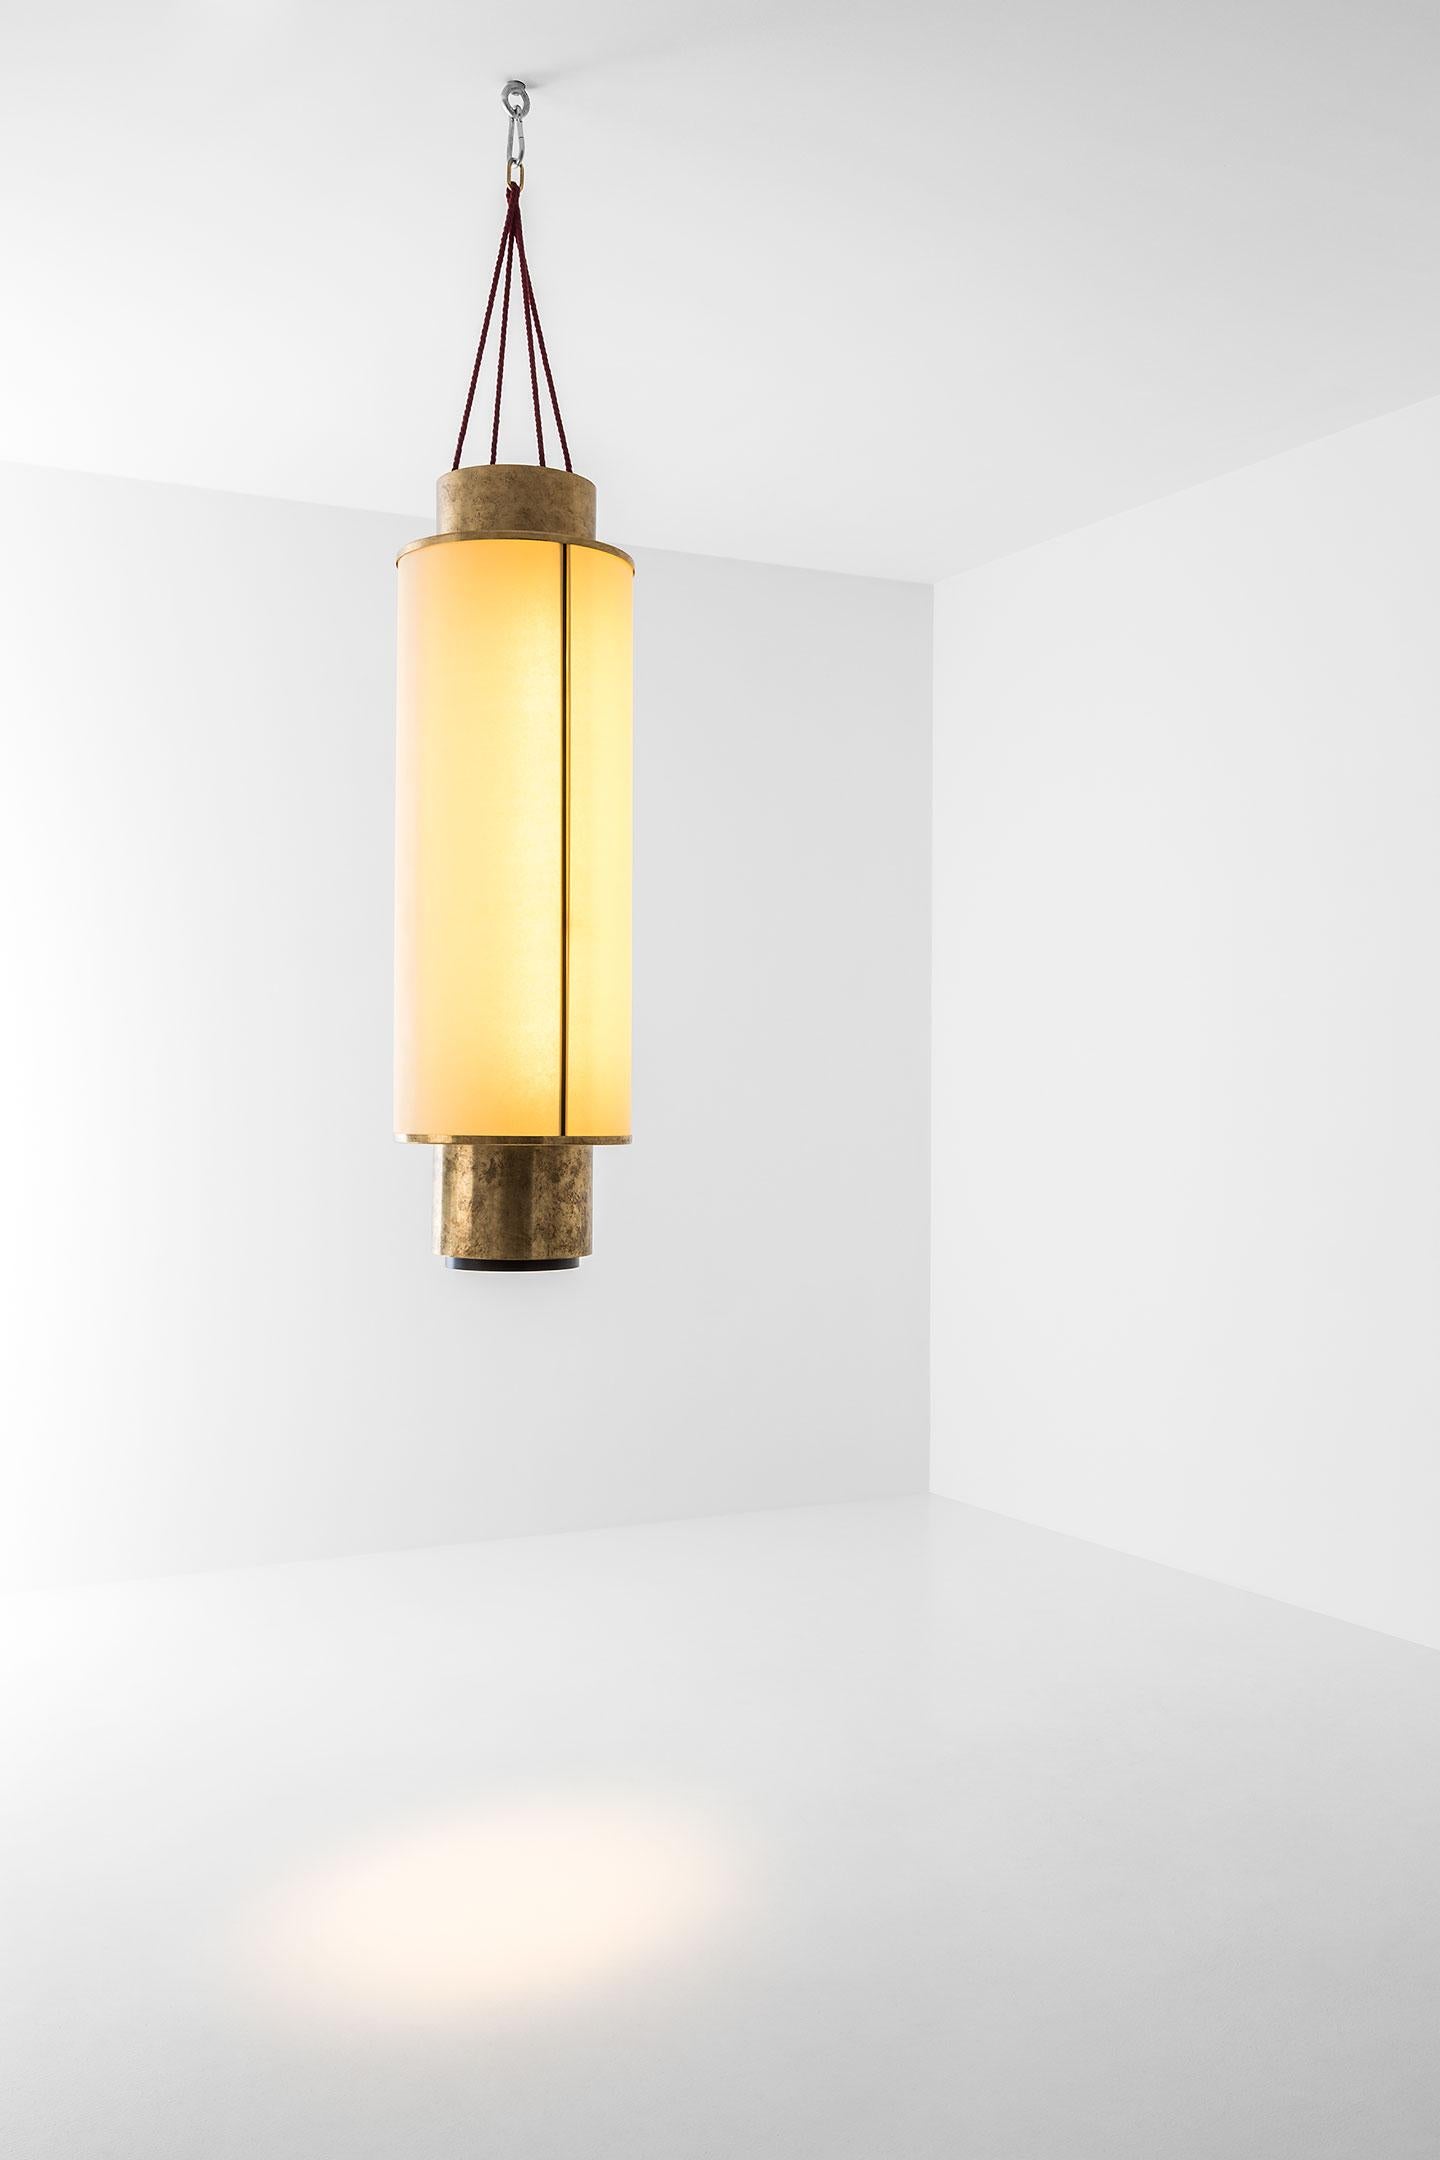 Modern Lanterna Ceiling Lamp in Painted Metal, Brass and Paper by Dimoremilano For Sale